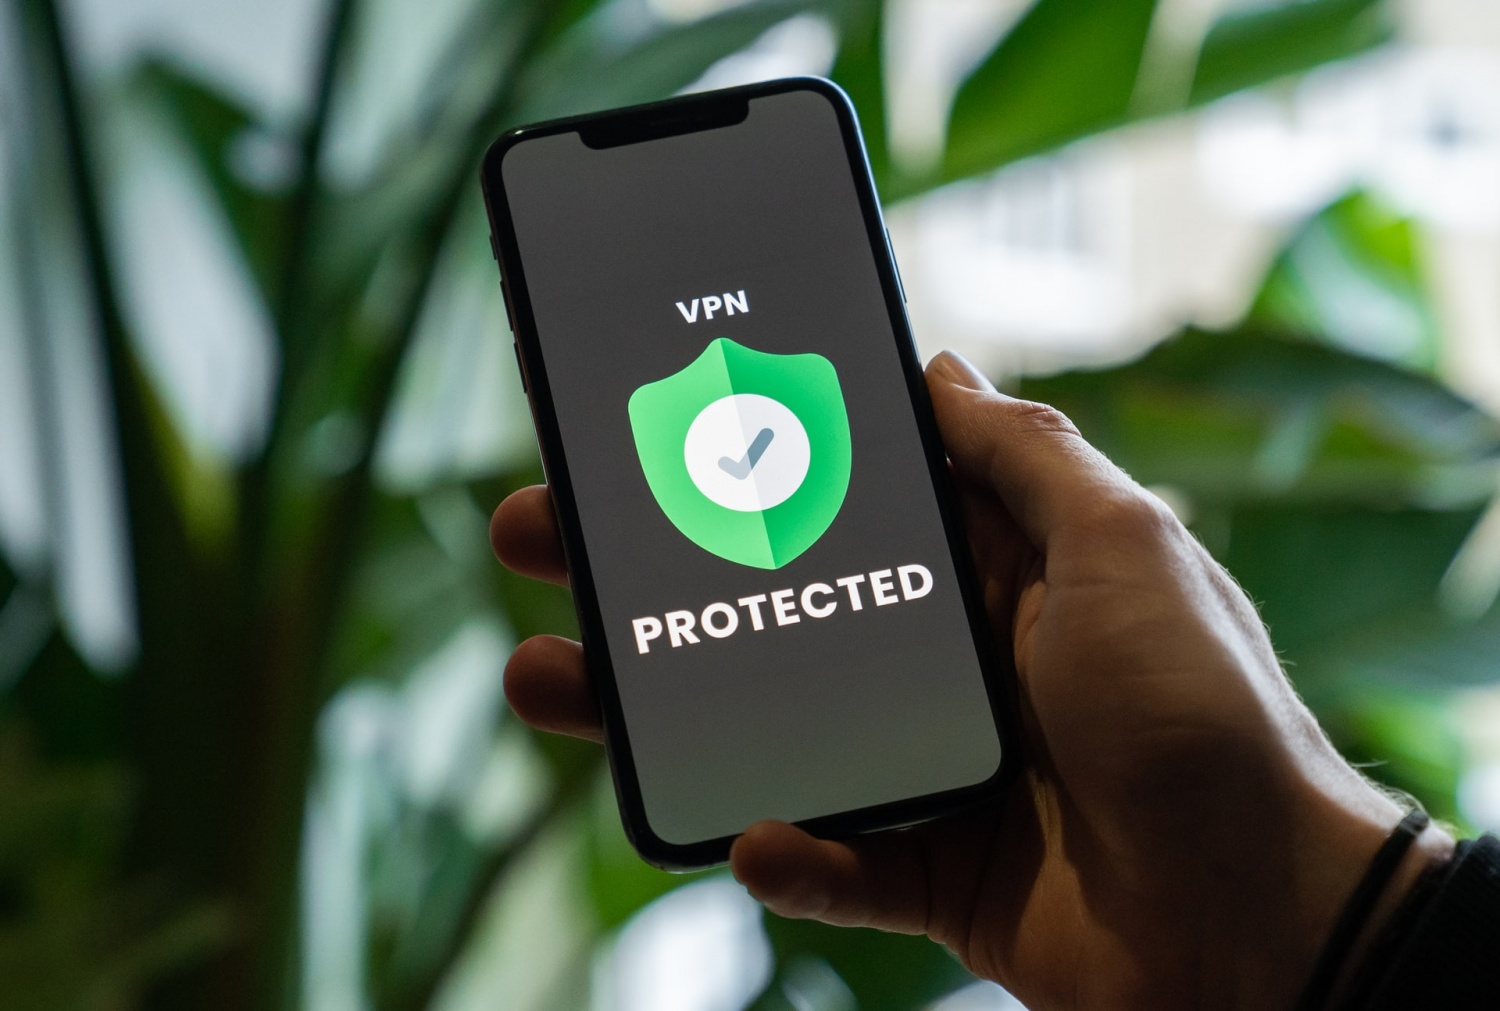 Best VPN Apps For Android Users in 2021: NordVPN, Surfshark, and MORE